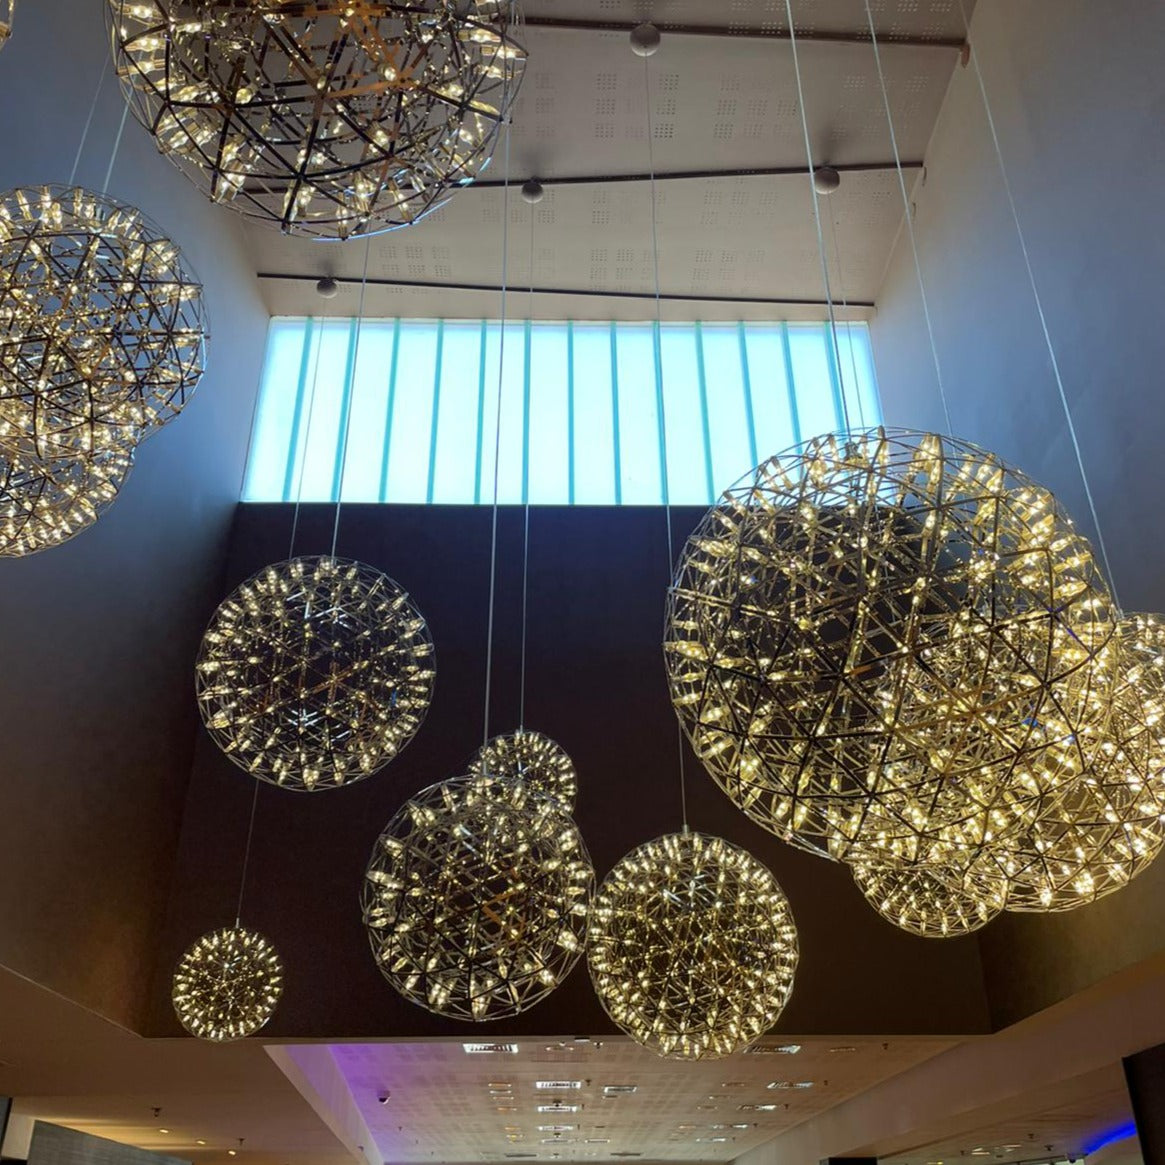 Our striking 80cm XXL large silver starburst light is the perfect way to make a statement with your interiors. It is inspired by elements of the night sky, comprising of a delicately crafted stainless steel round spherical shape and perfectly finished in LED lights